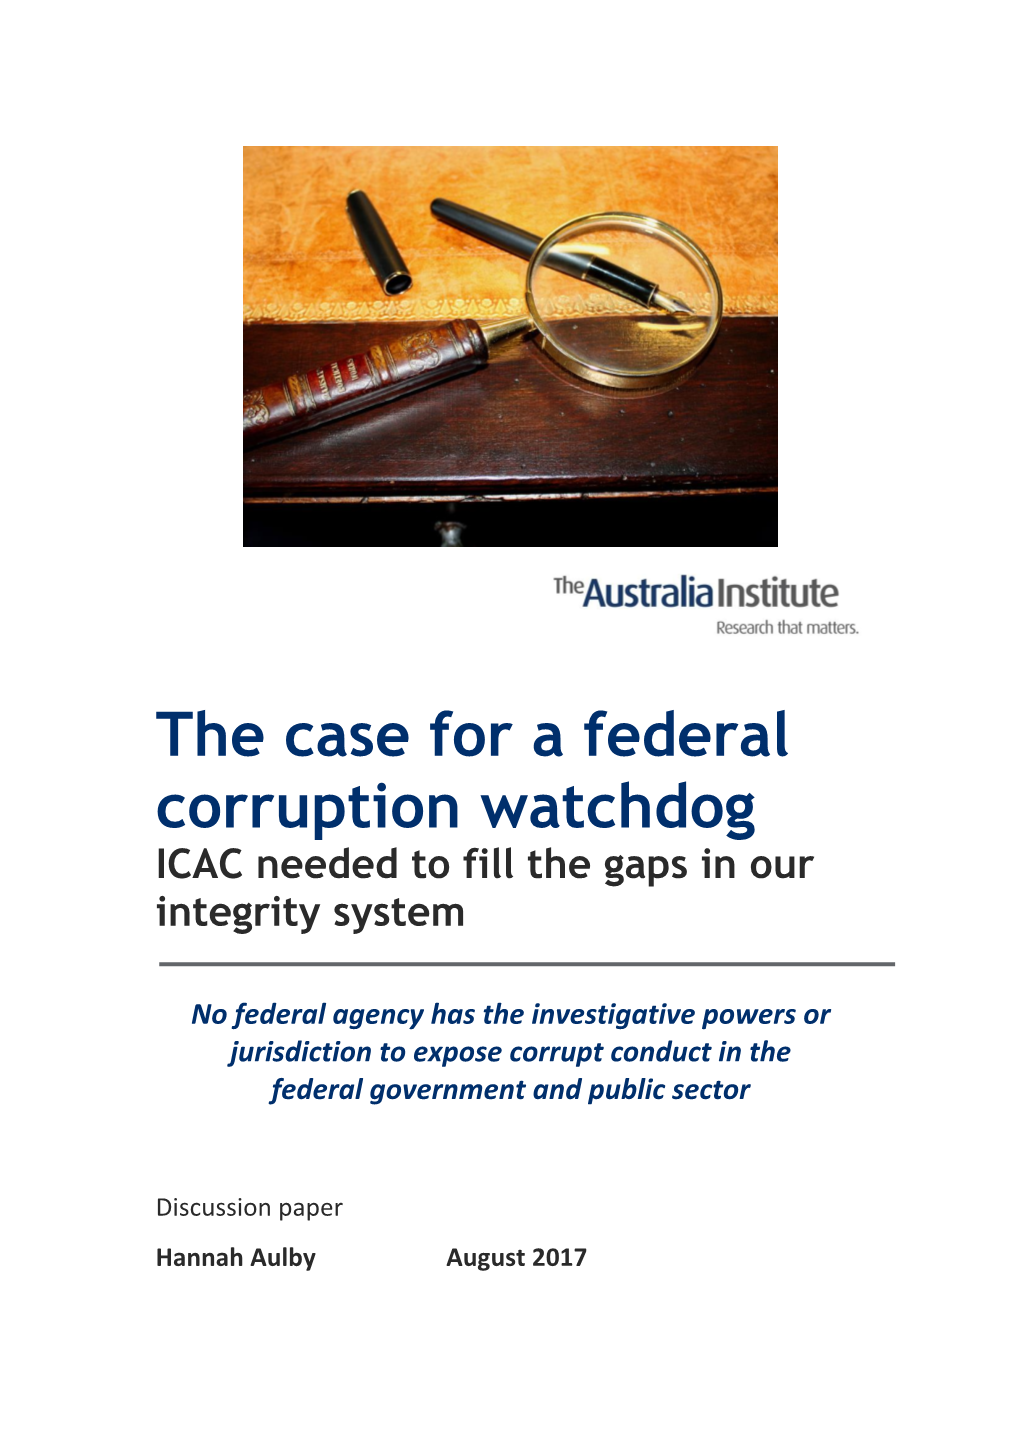 The Case for a Federal Corruption Watchdog ICAC Needed to Fill the Gaps in Our Integrity System